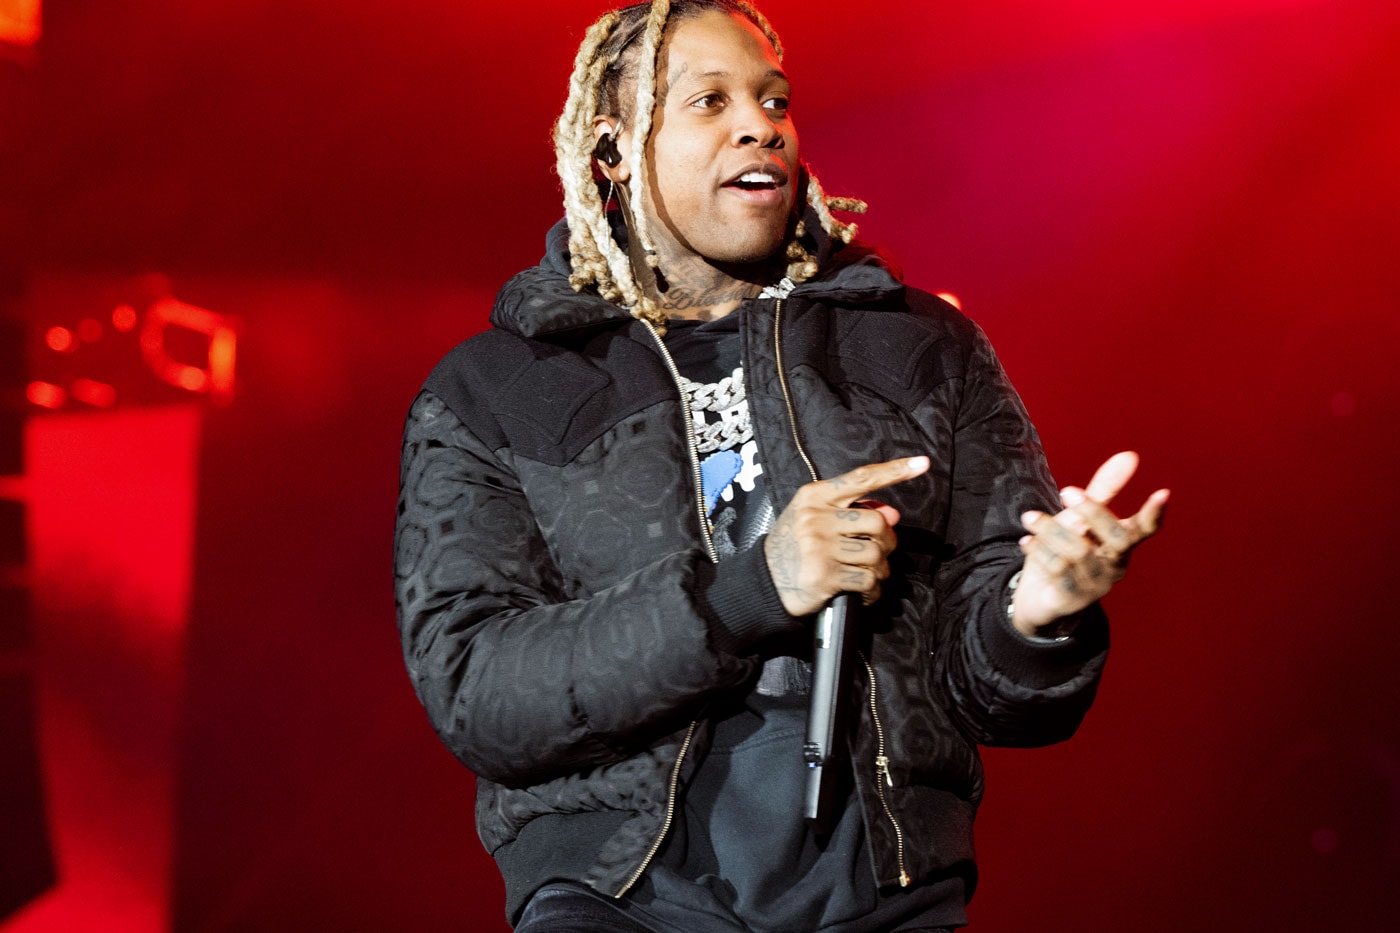 Lil Durk 7220 No 1 Debut Billboard 200 first solo entry 